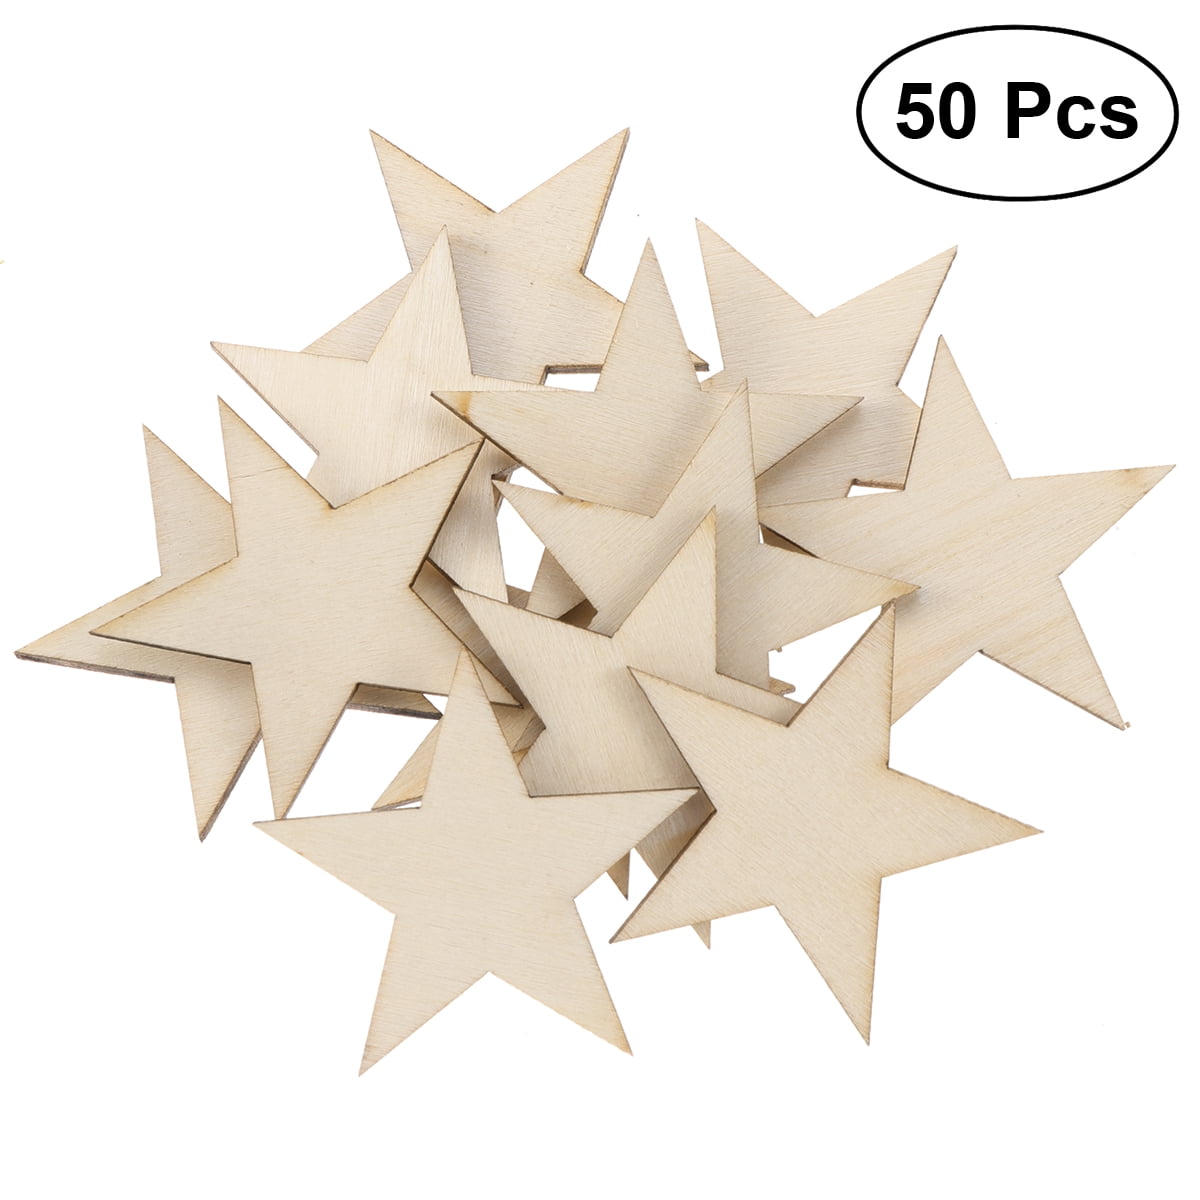 50PCS Star Shaped Wood Pieces Wooden Ornament Wood Log Slices for House Garden Home DIY Art Craft 